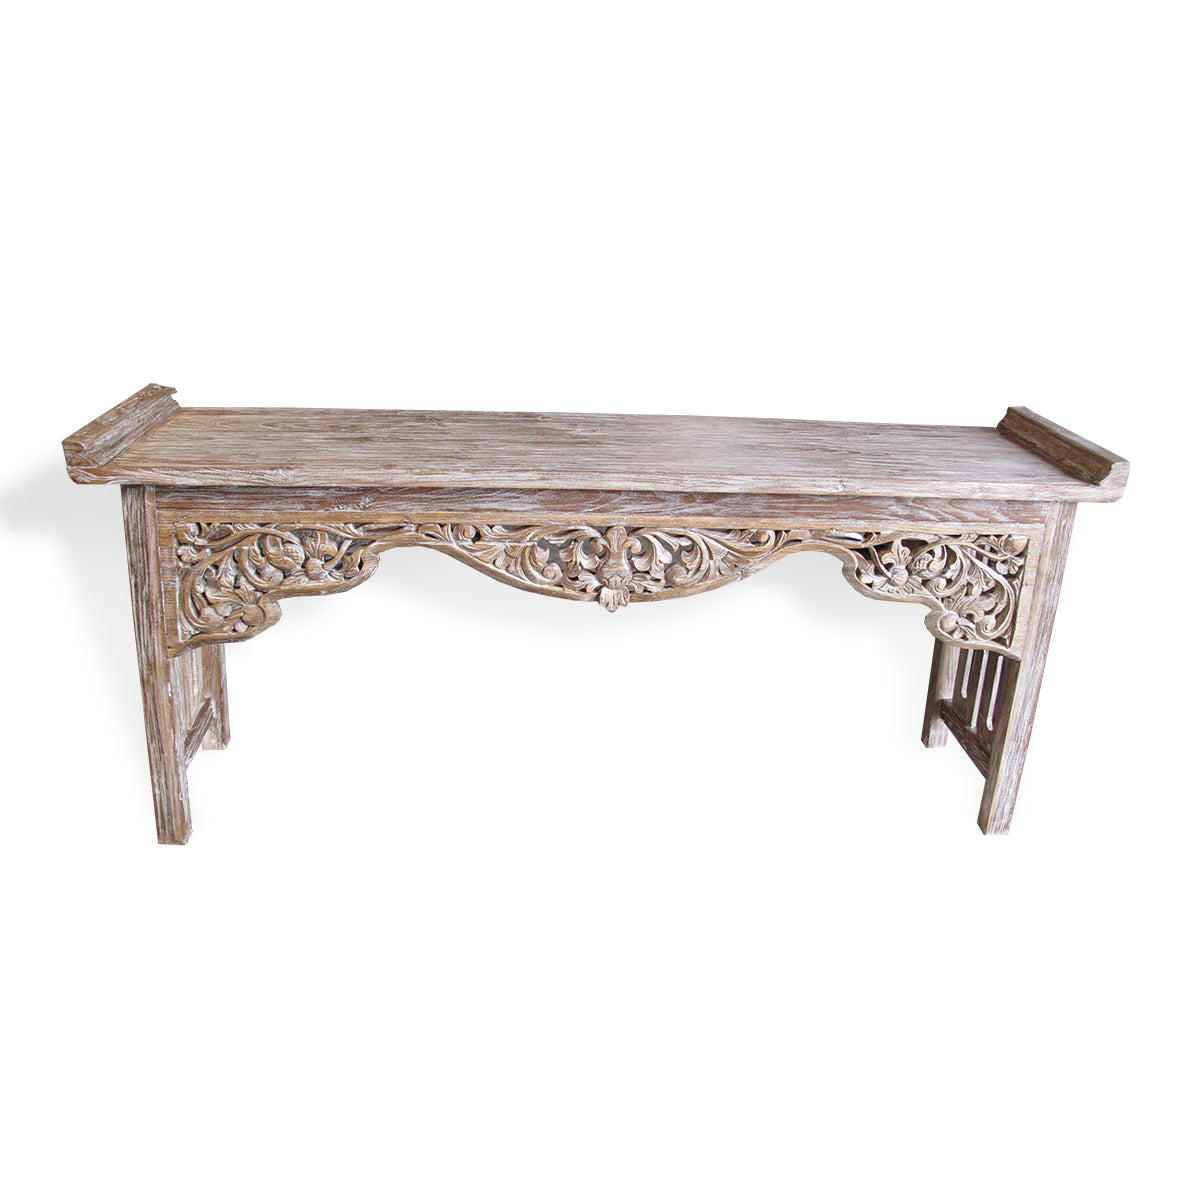 LAC047 WHITE WASH RECYCLED TEAK WOOD CARVED CONSOLE TABLE